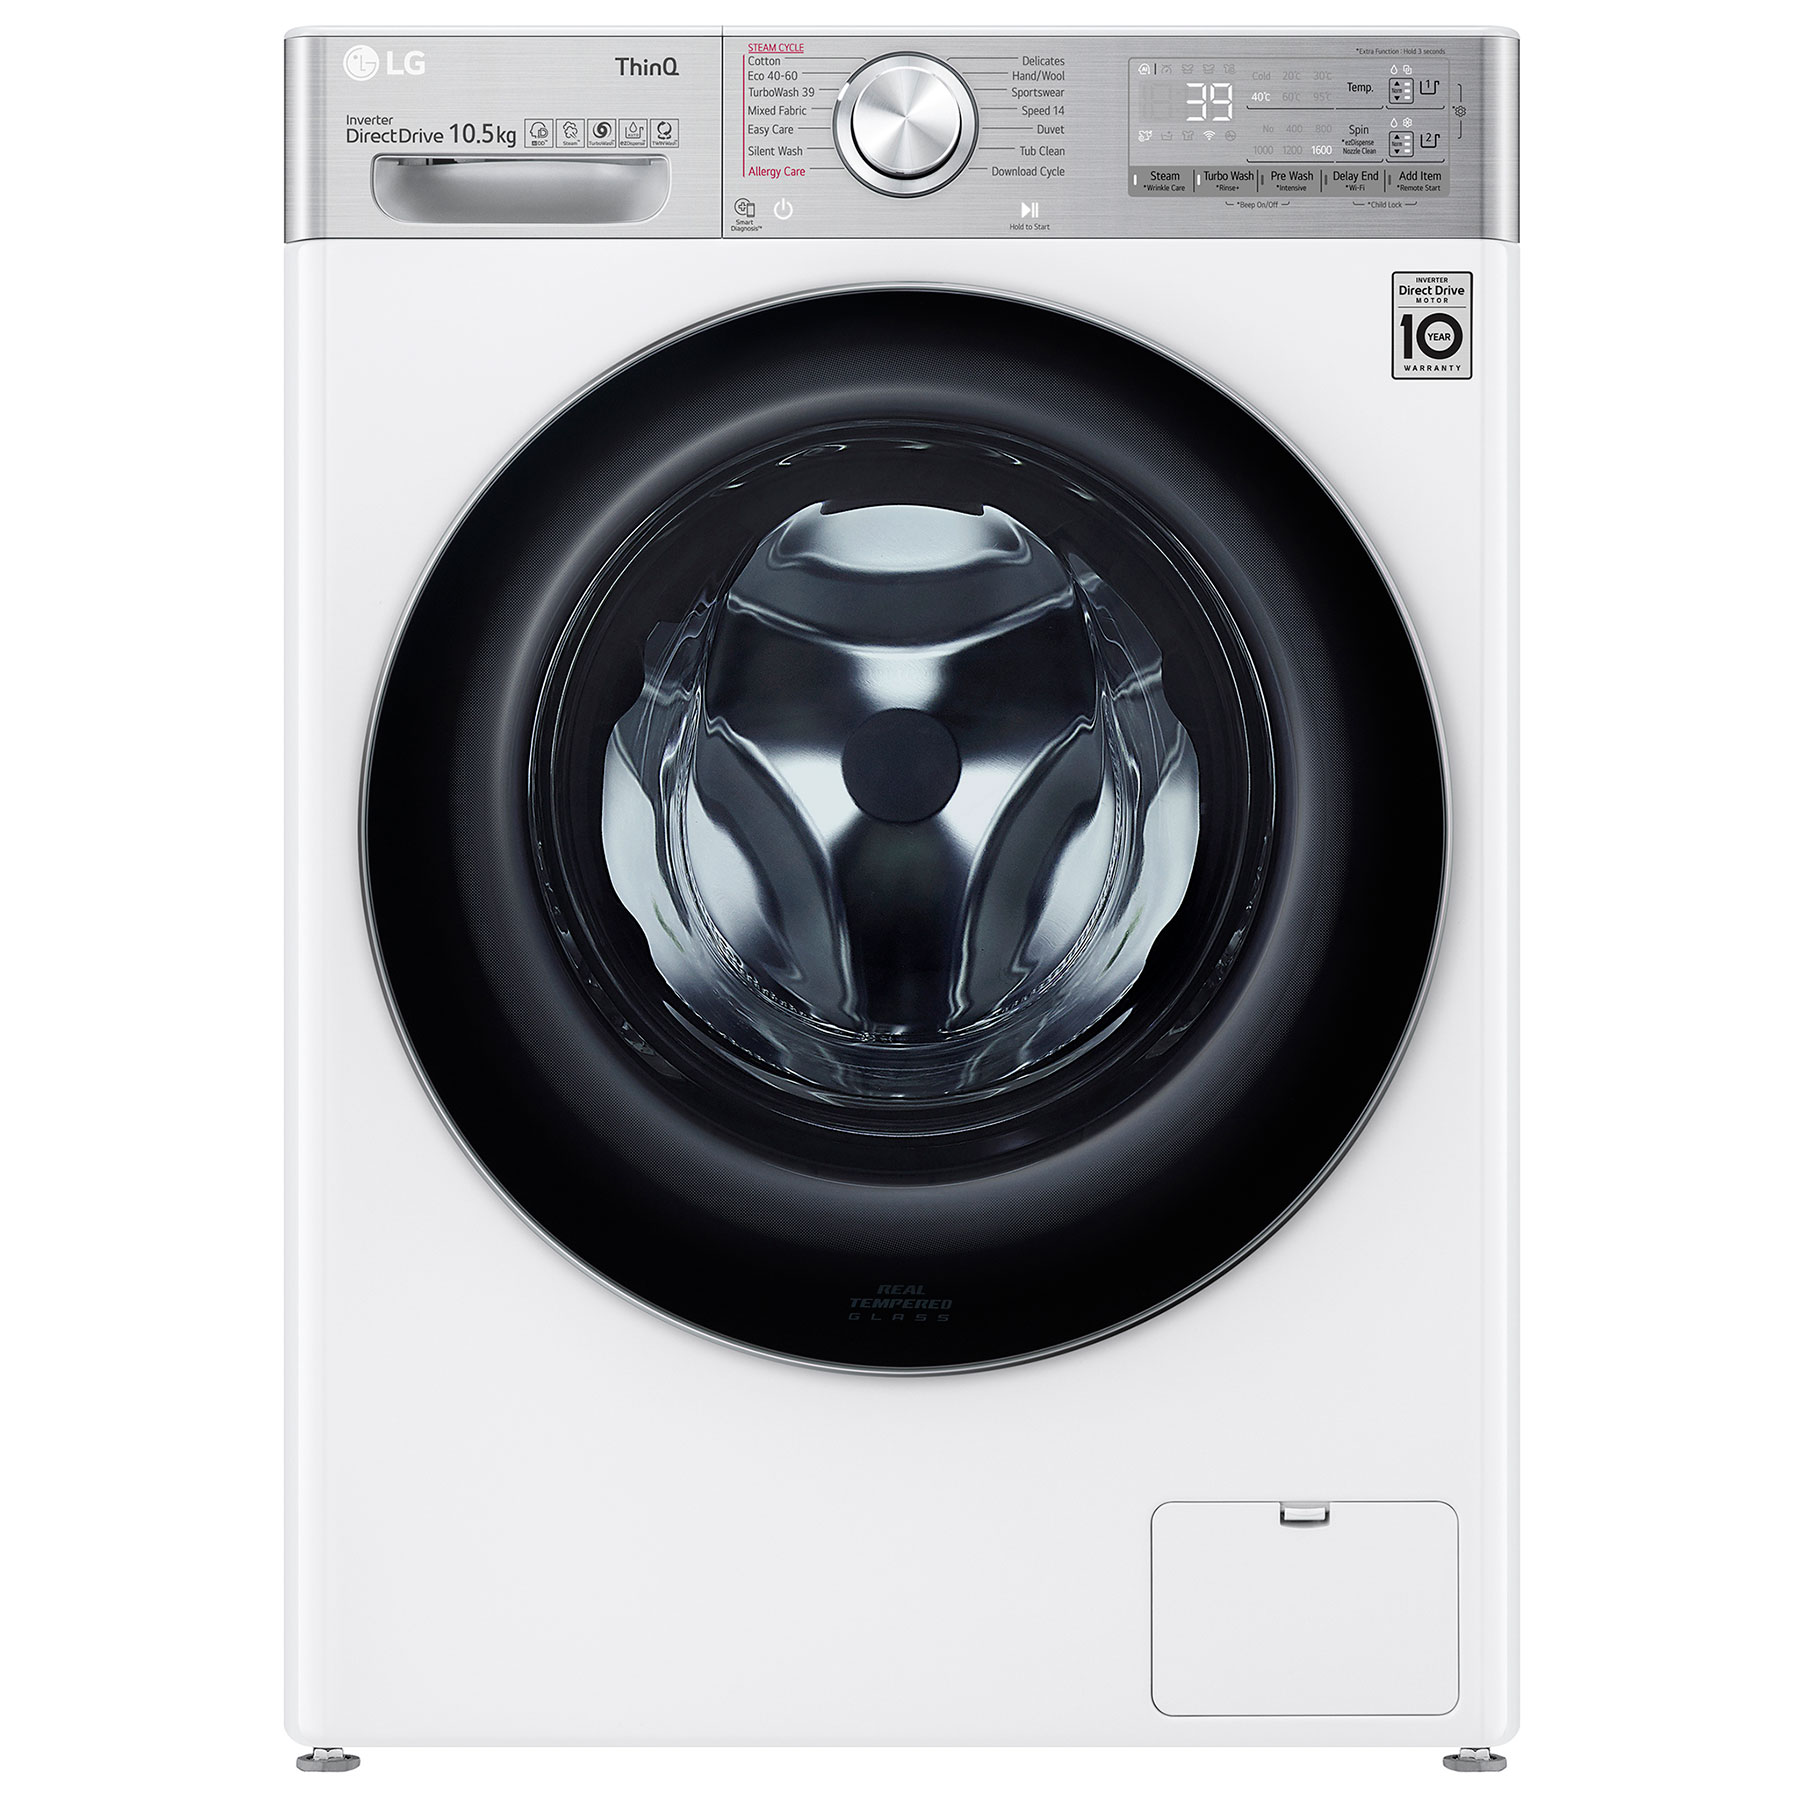 Image of LG F6V1110WTSA Washing Machine in White 1600rpm 10 5kg A Rated